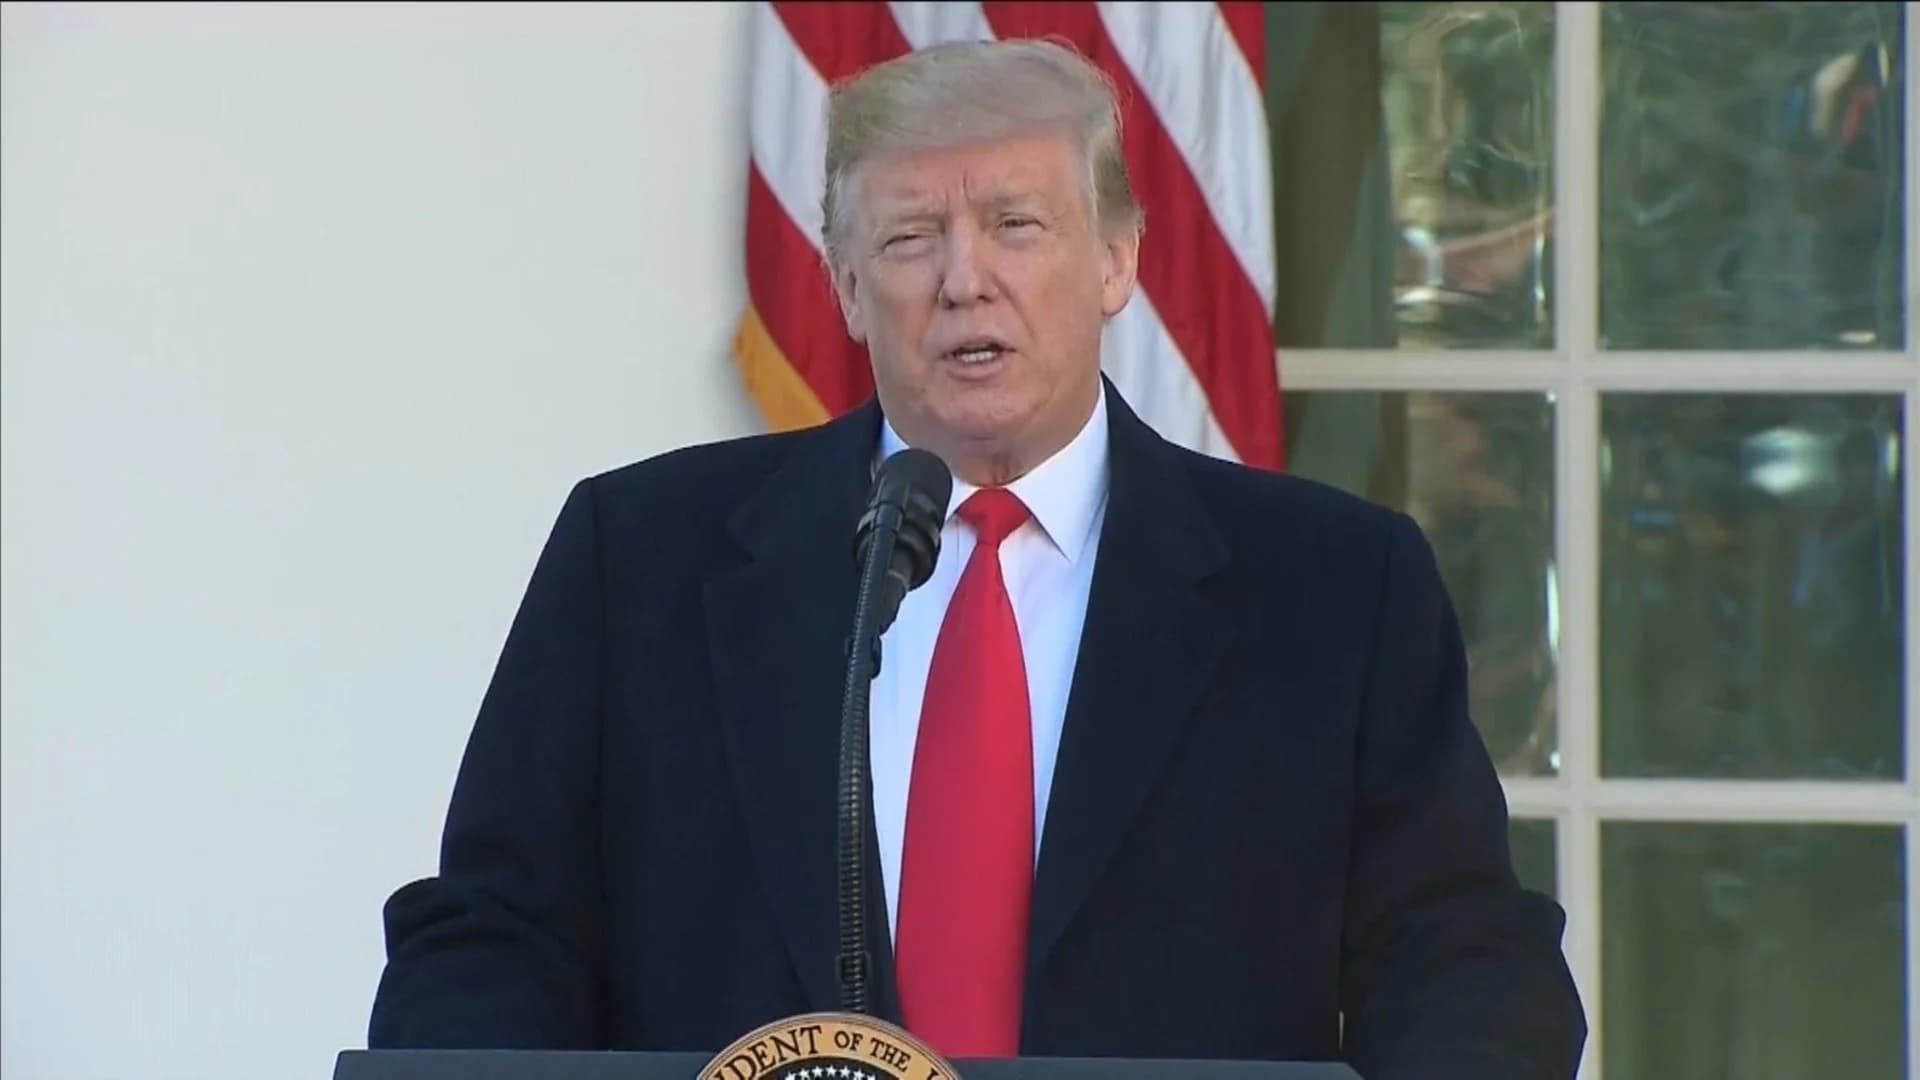 President Trump makes border security announcement - Live Coverage